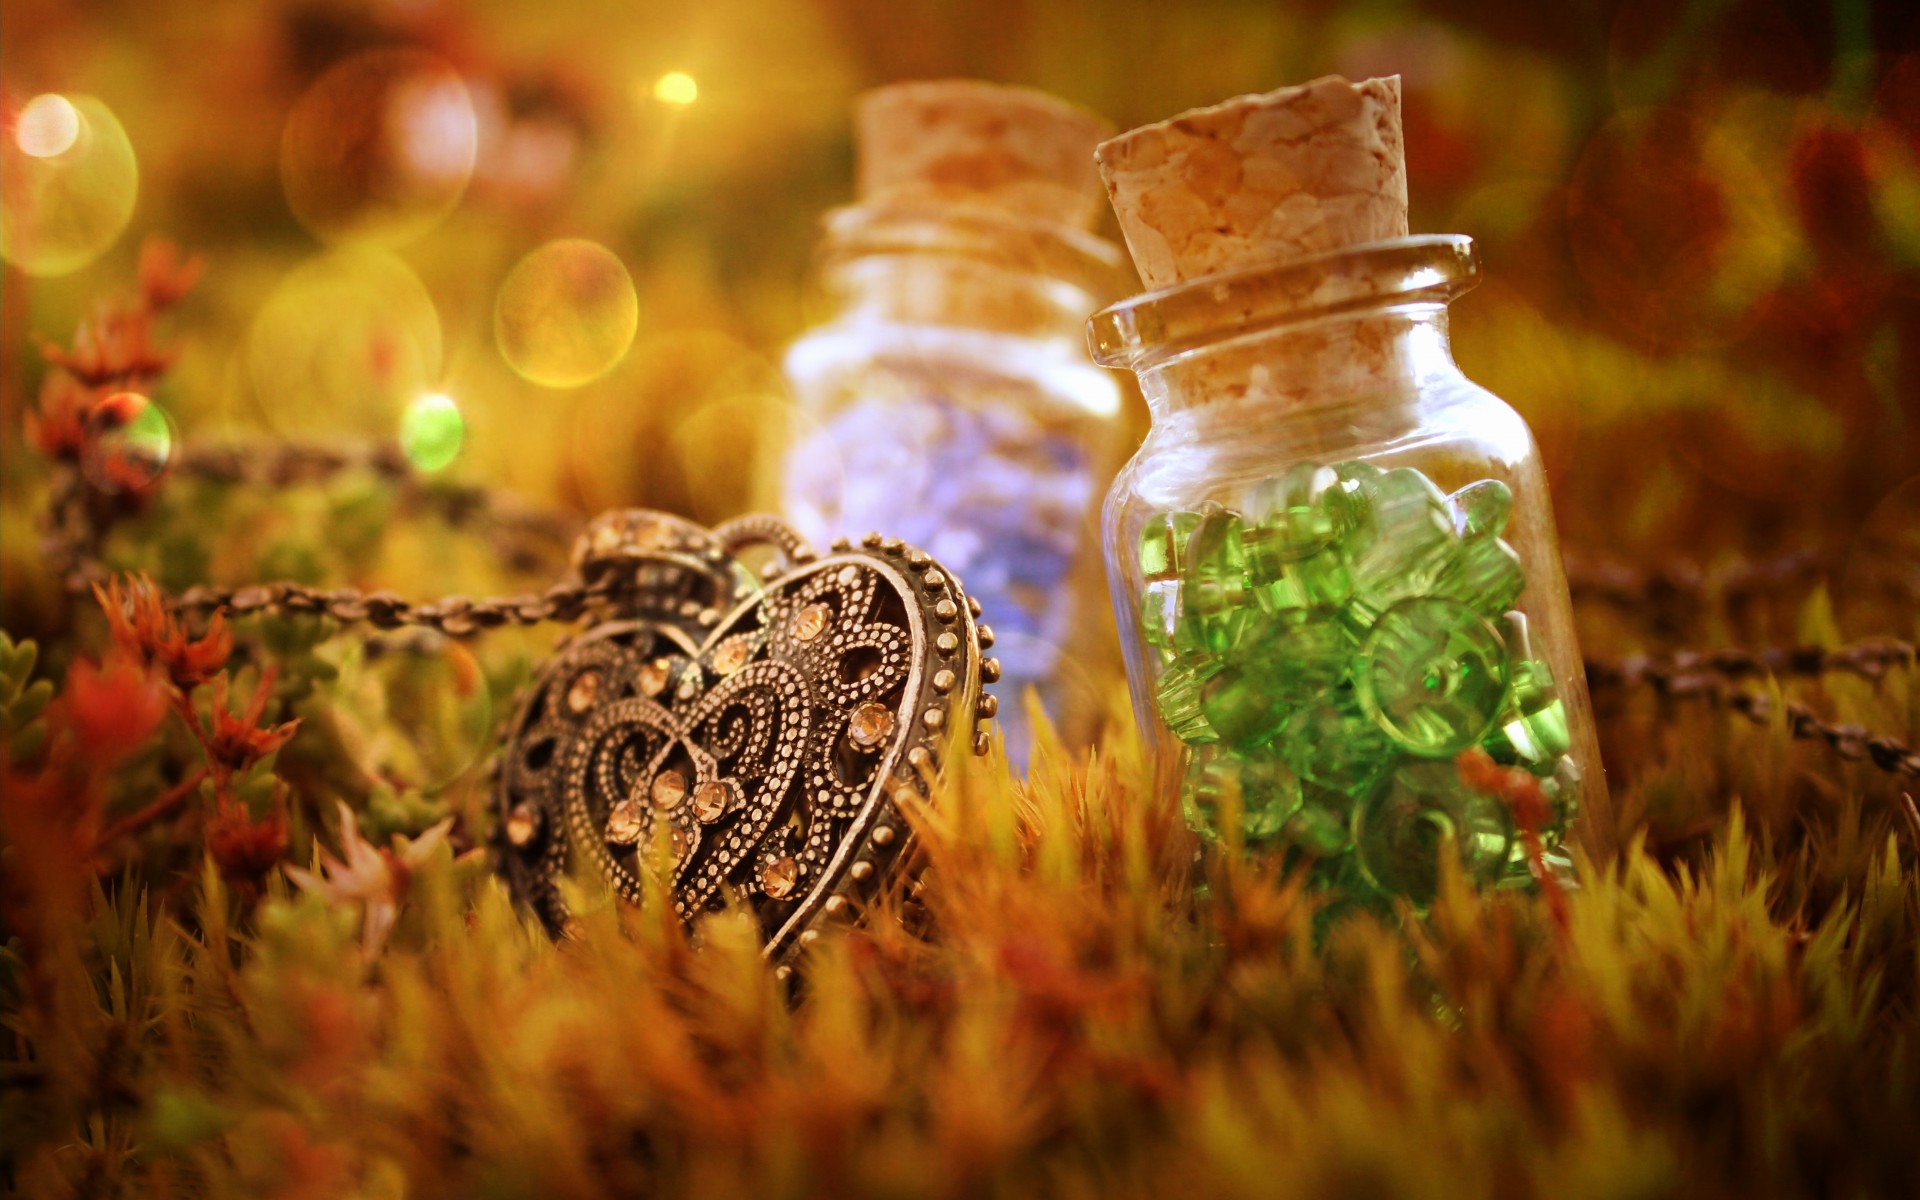 bokeh, Photography, Mood, Emotion, Fantasy, Heart, Necklace, Jewelry, Moss, Color, Crystals, Cork, Bottle, Jar, Glass, Reflection Wallpaper